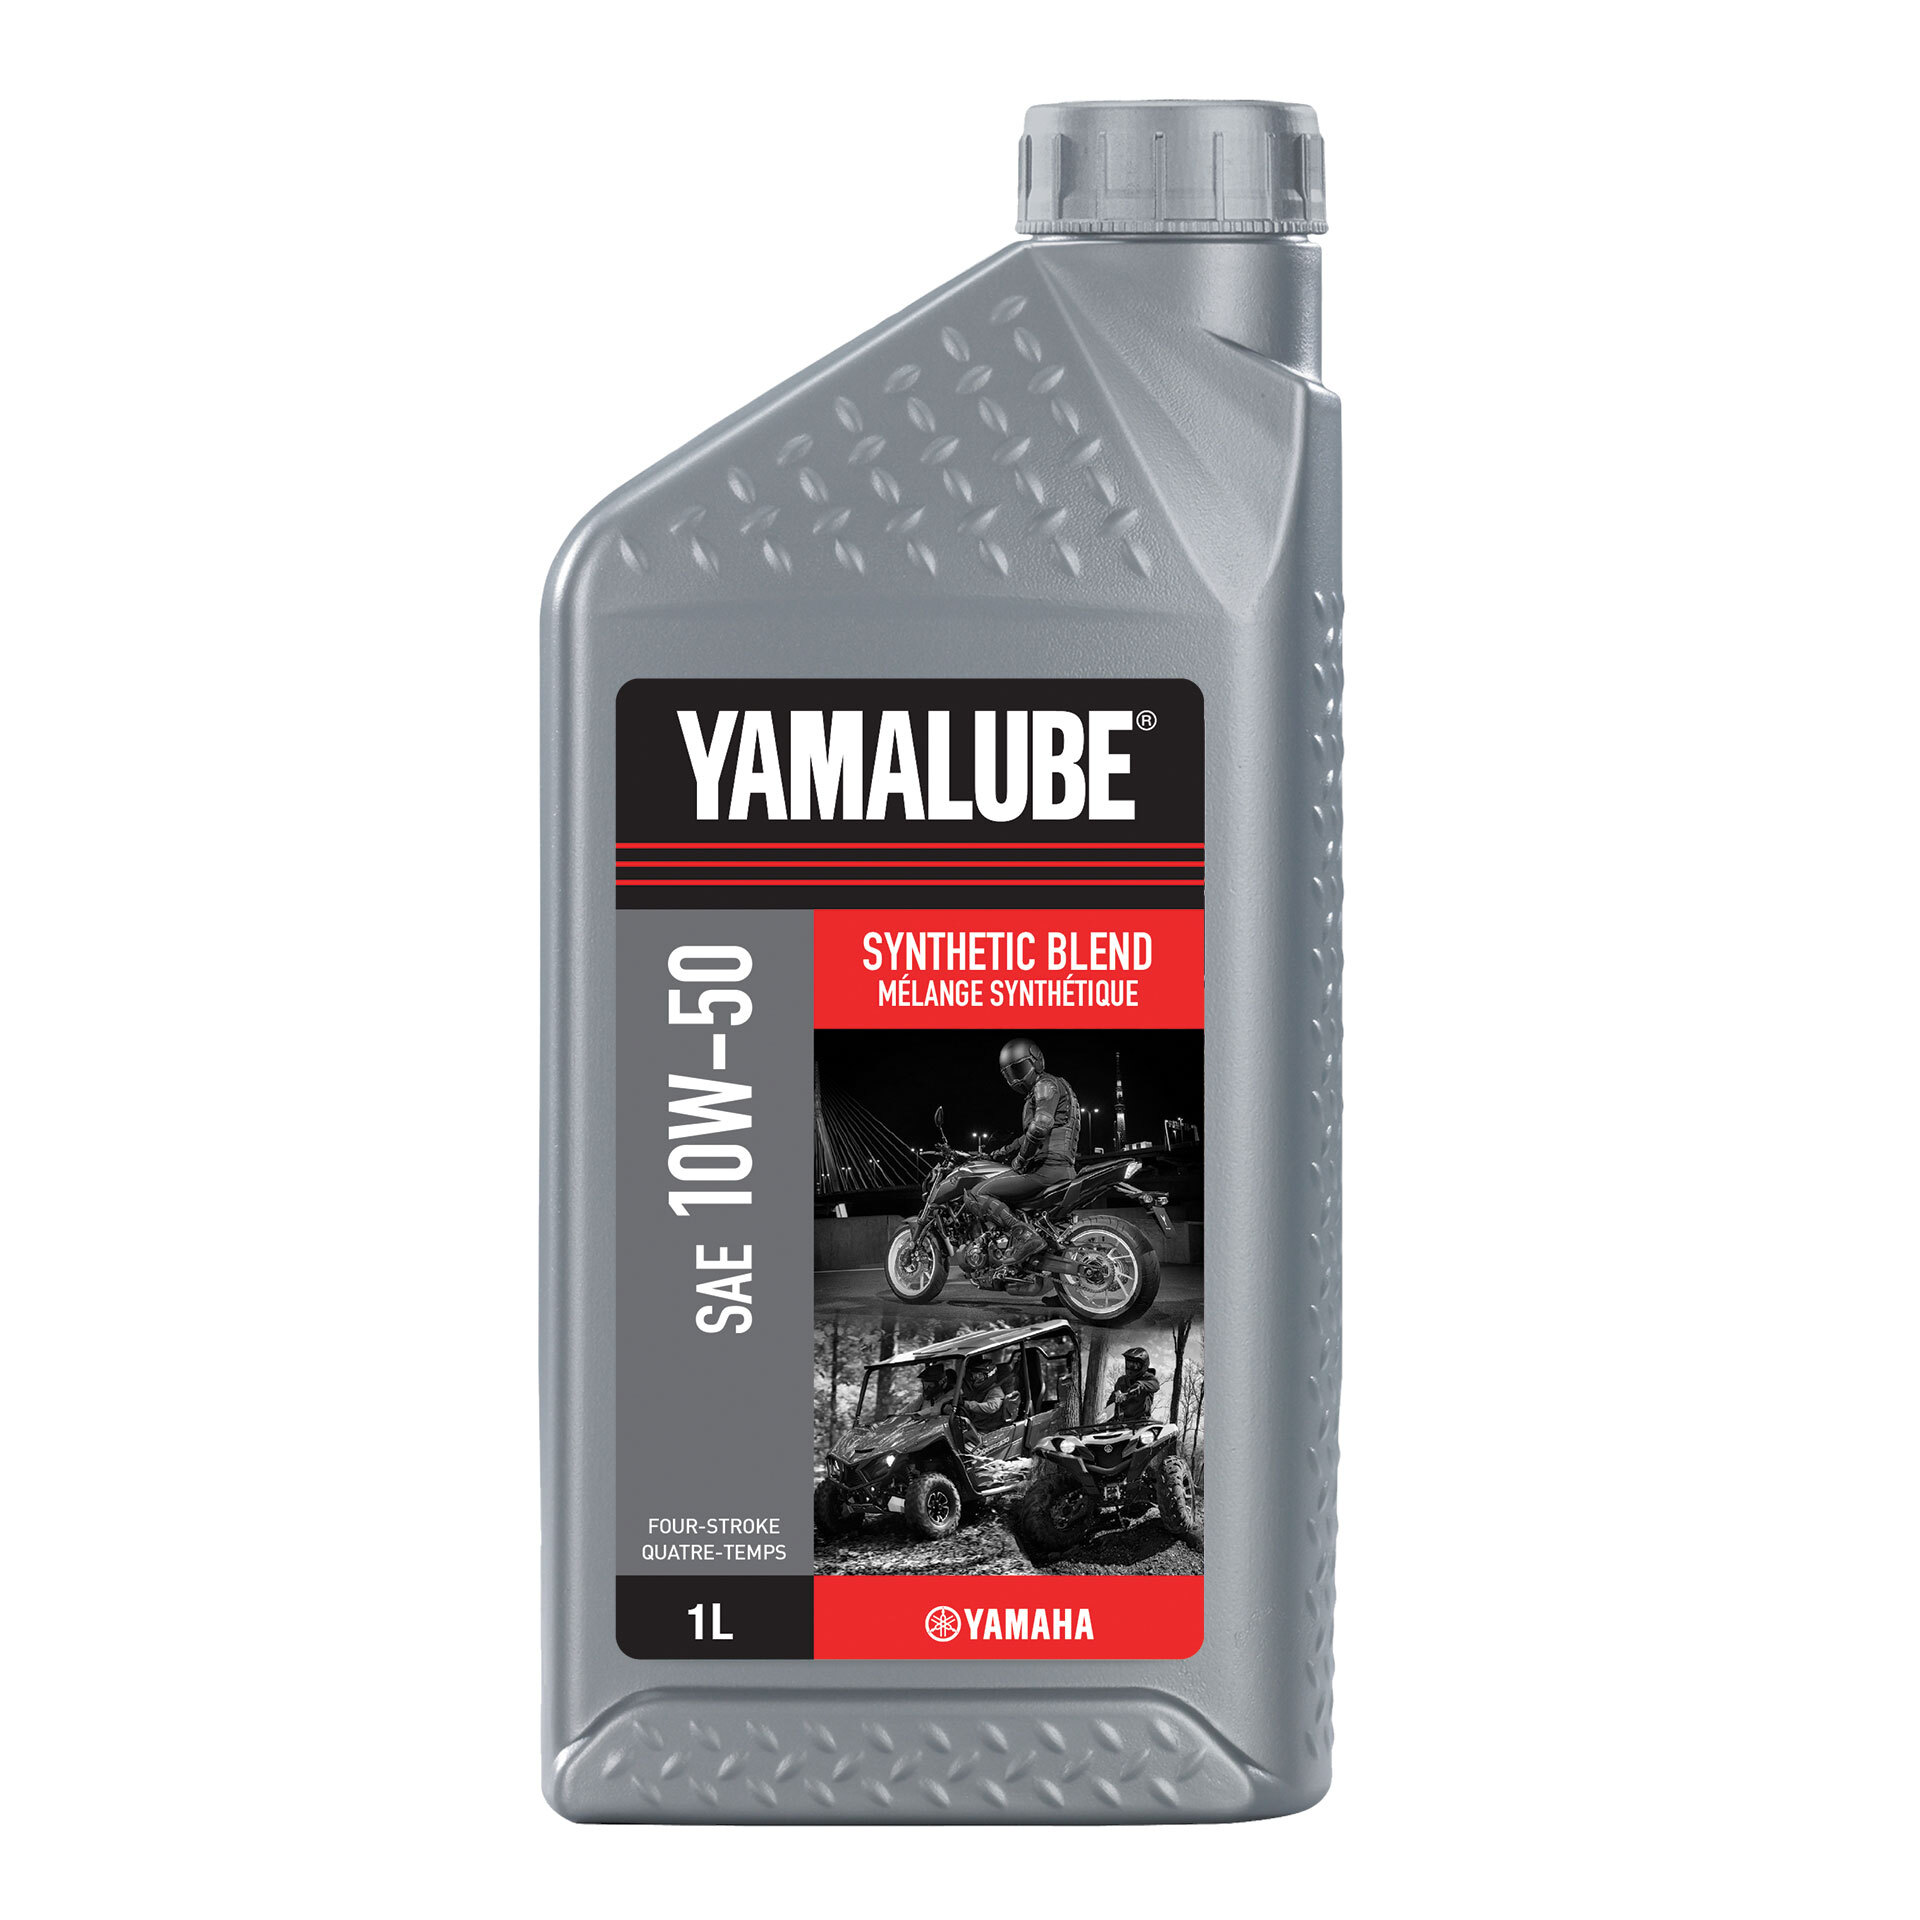 Yamalube® 10W 50 Synthetic Blend Engine Oil